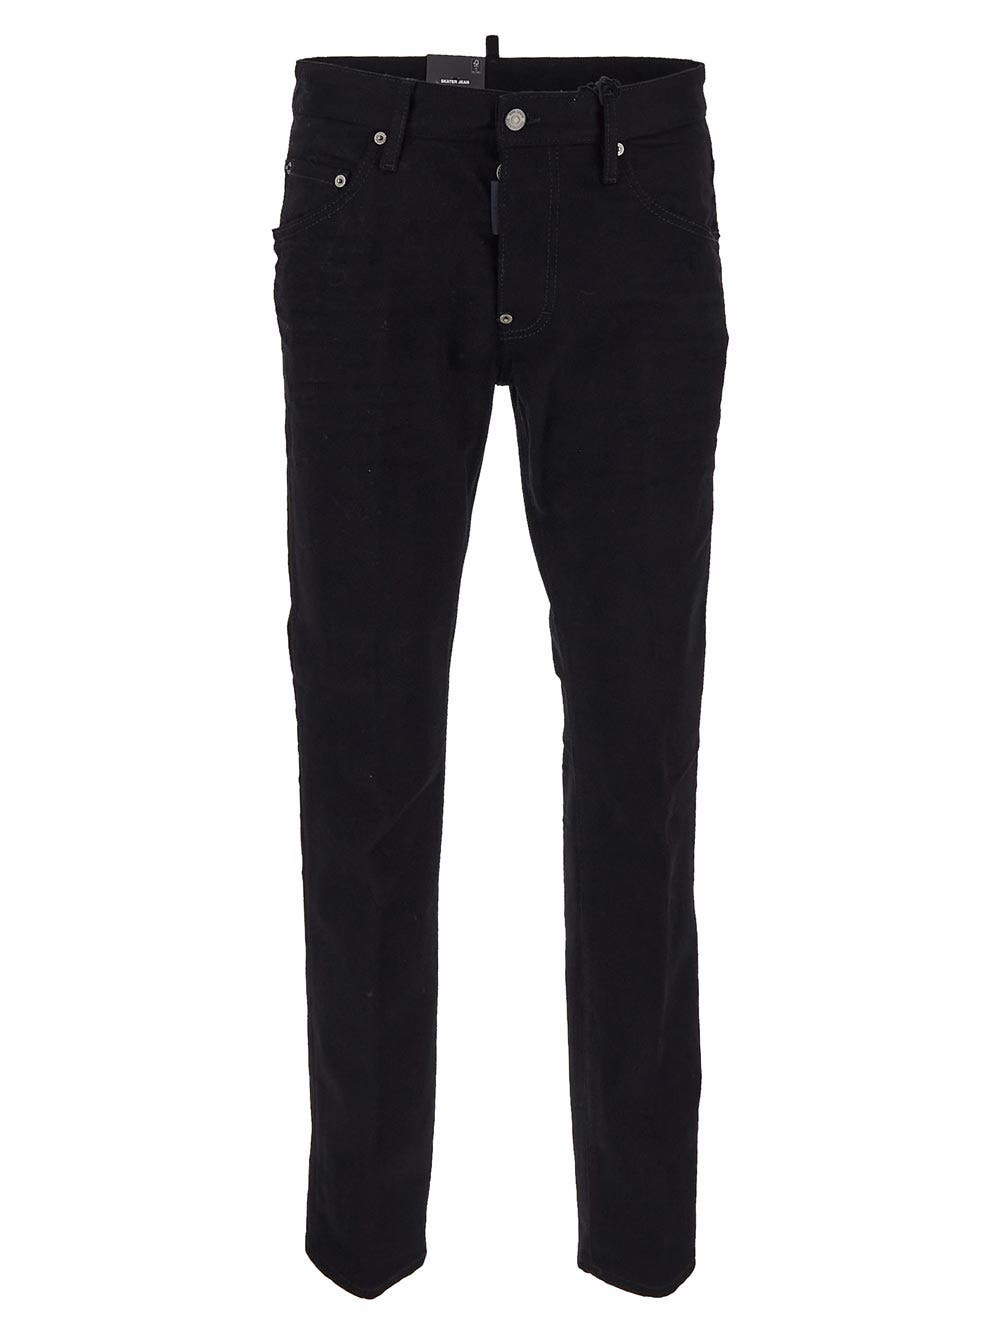 Ceresio 9 Stretch Wool Pants